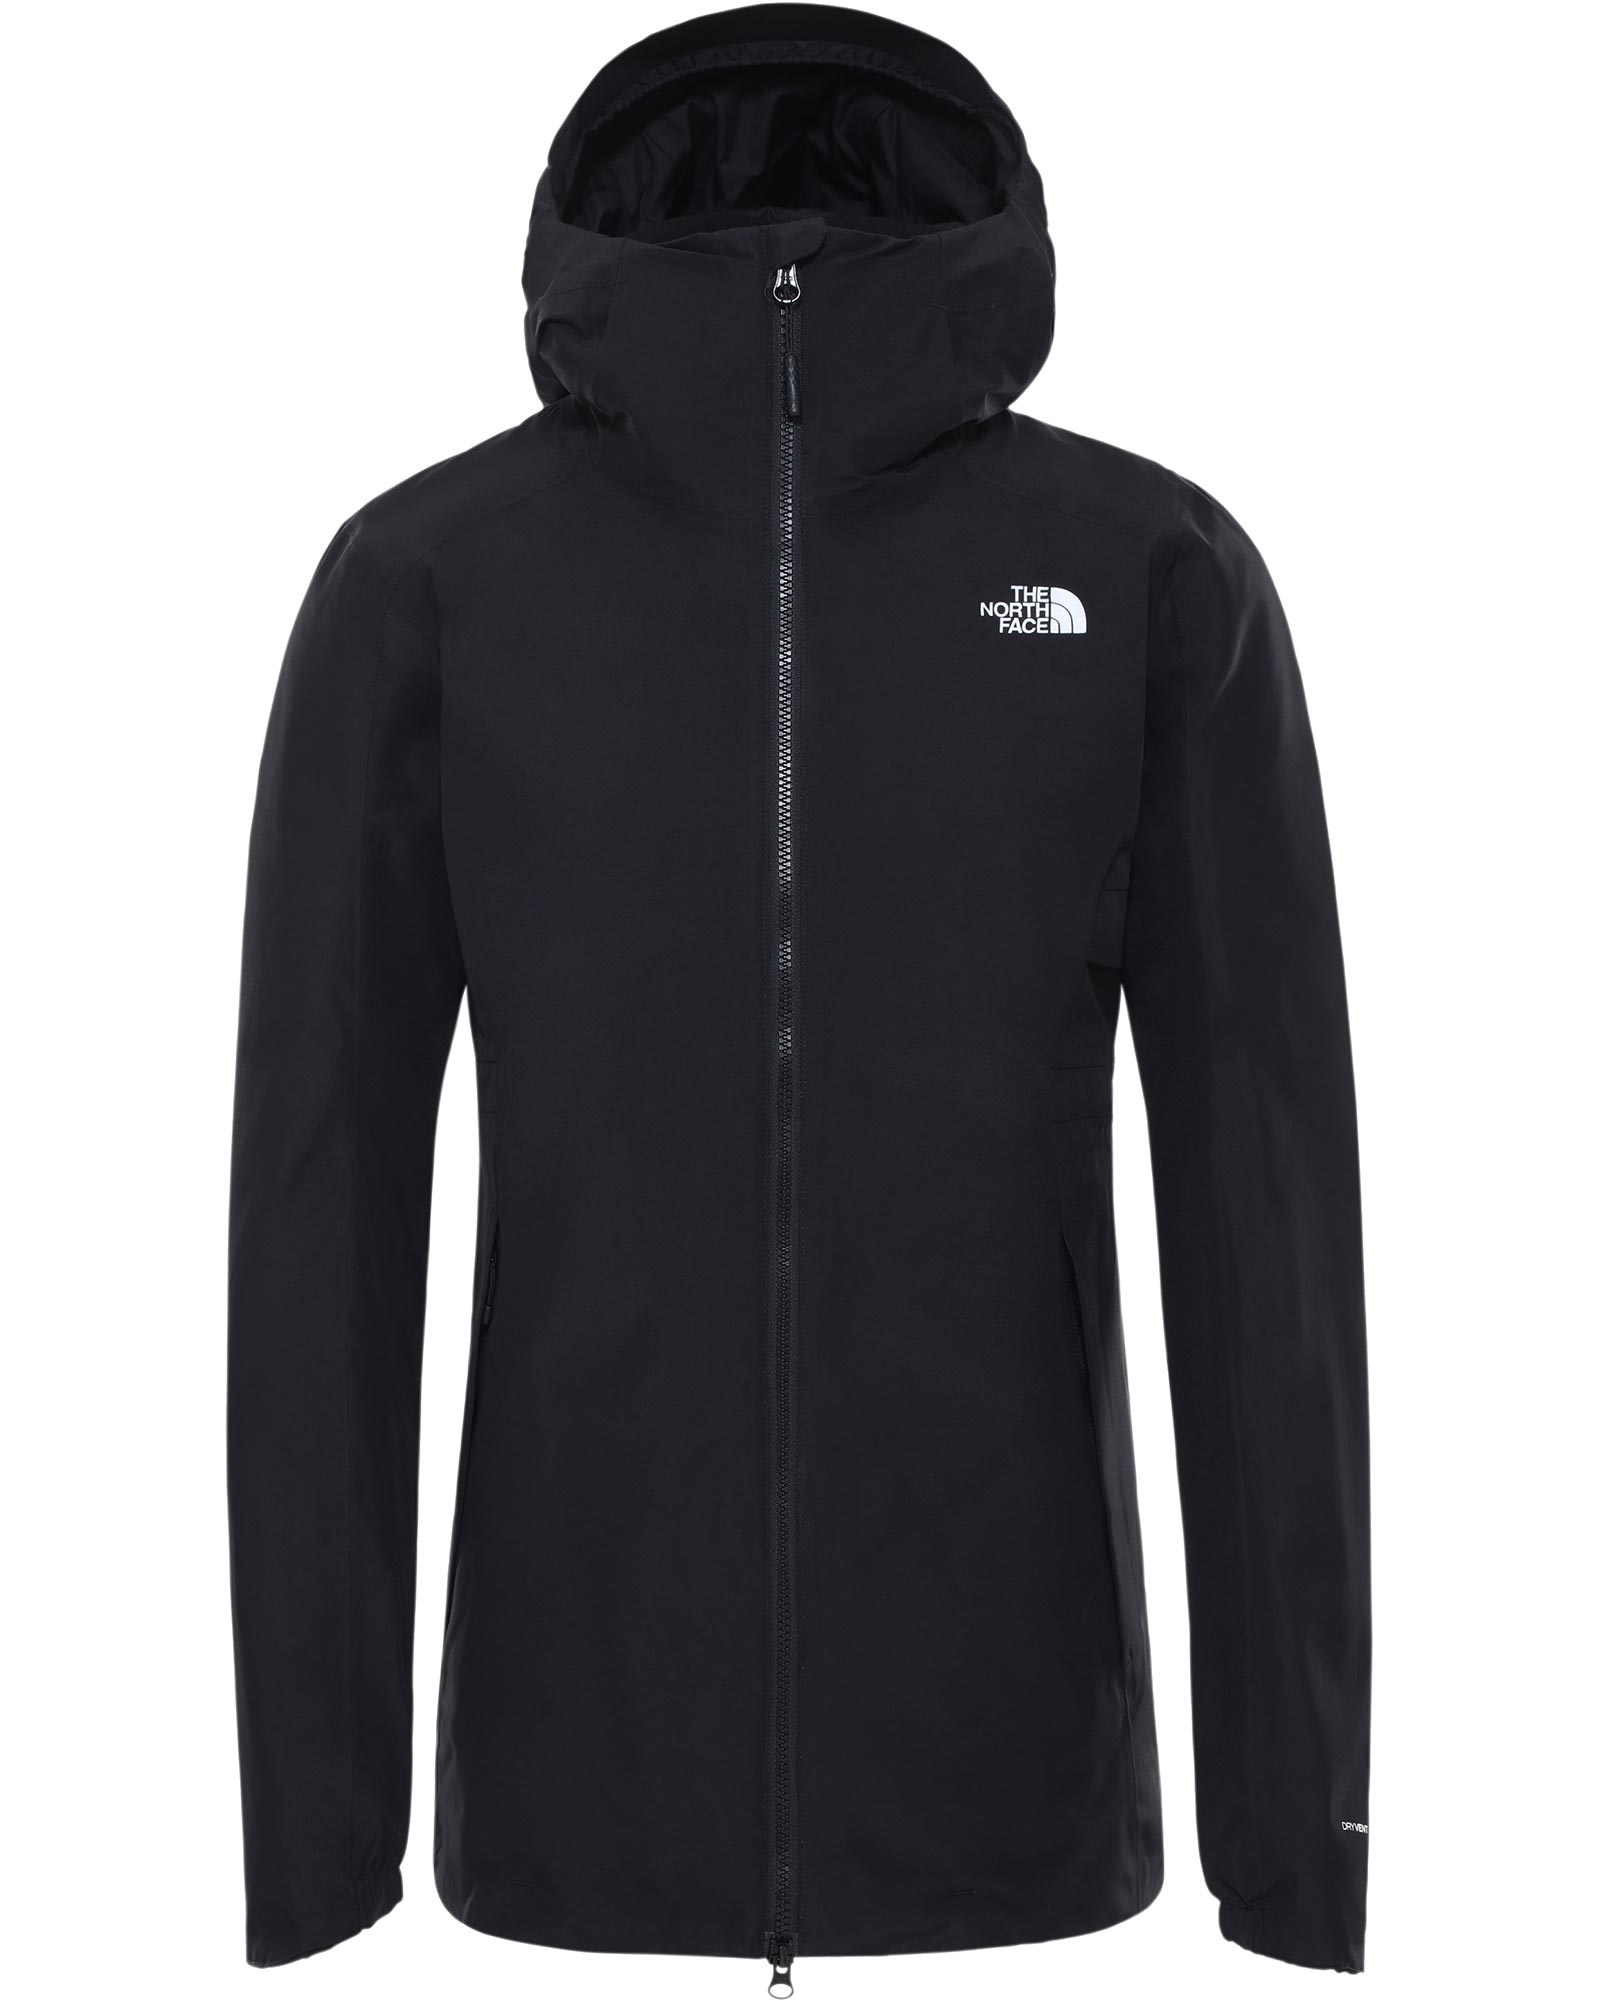 The North Face Hikesteller Women’s Insulated Parka Jacket - TNF Black L